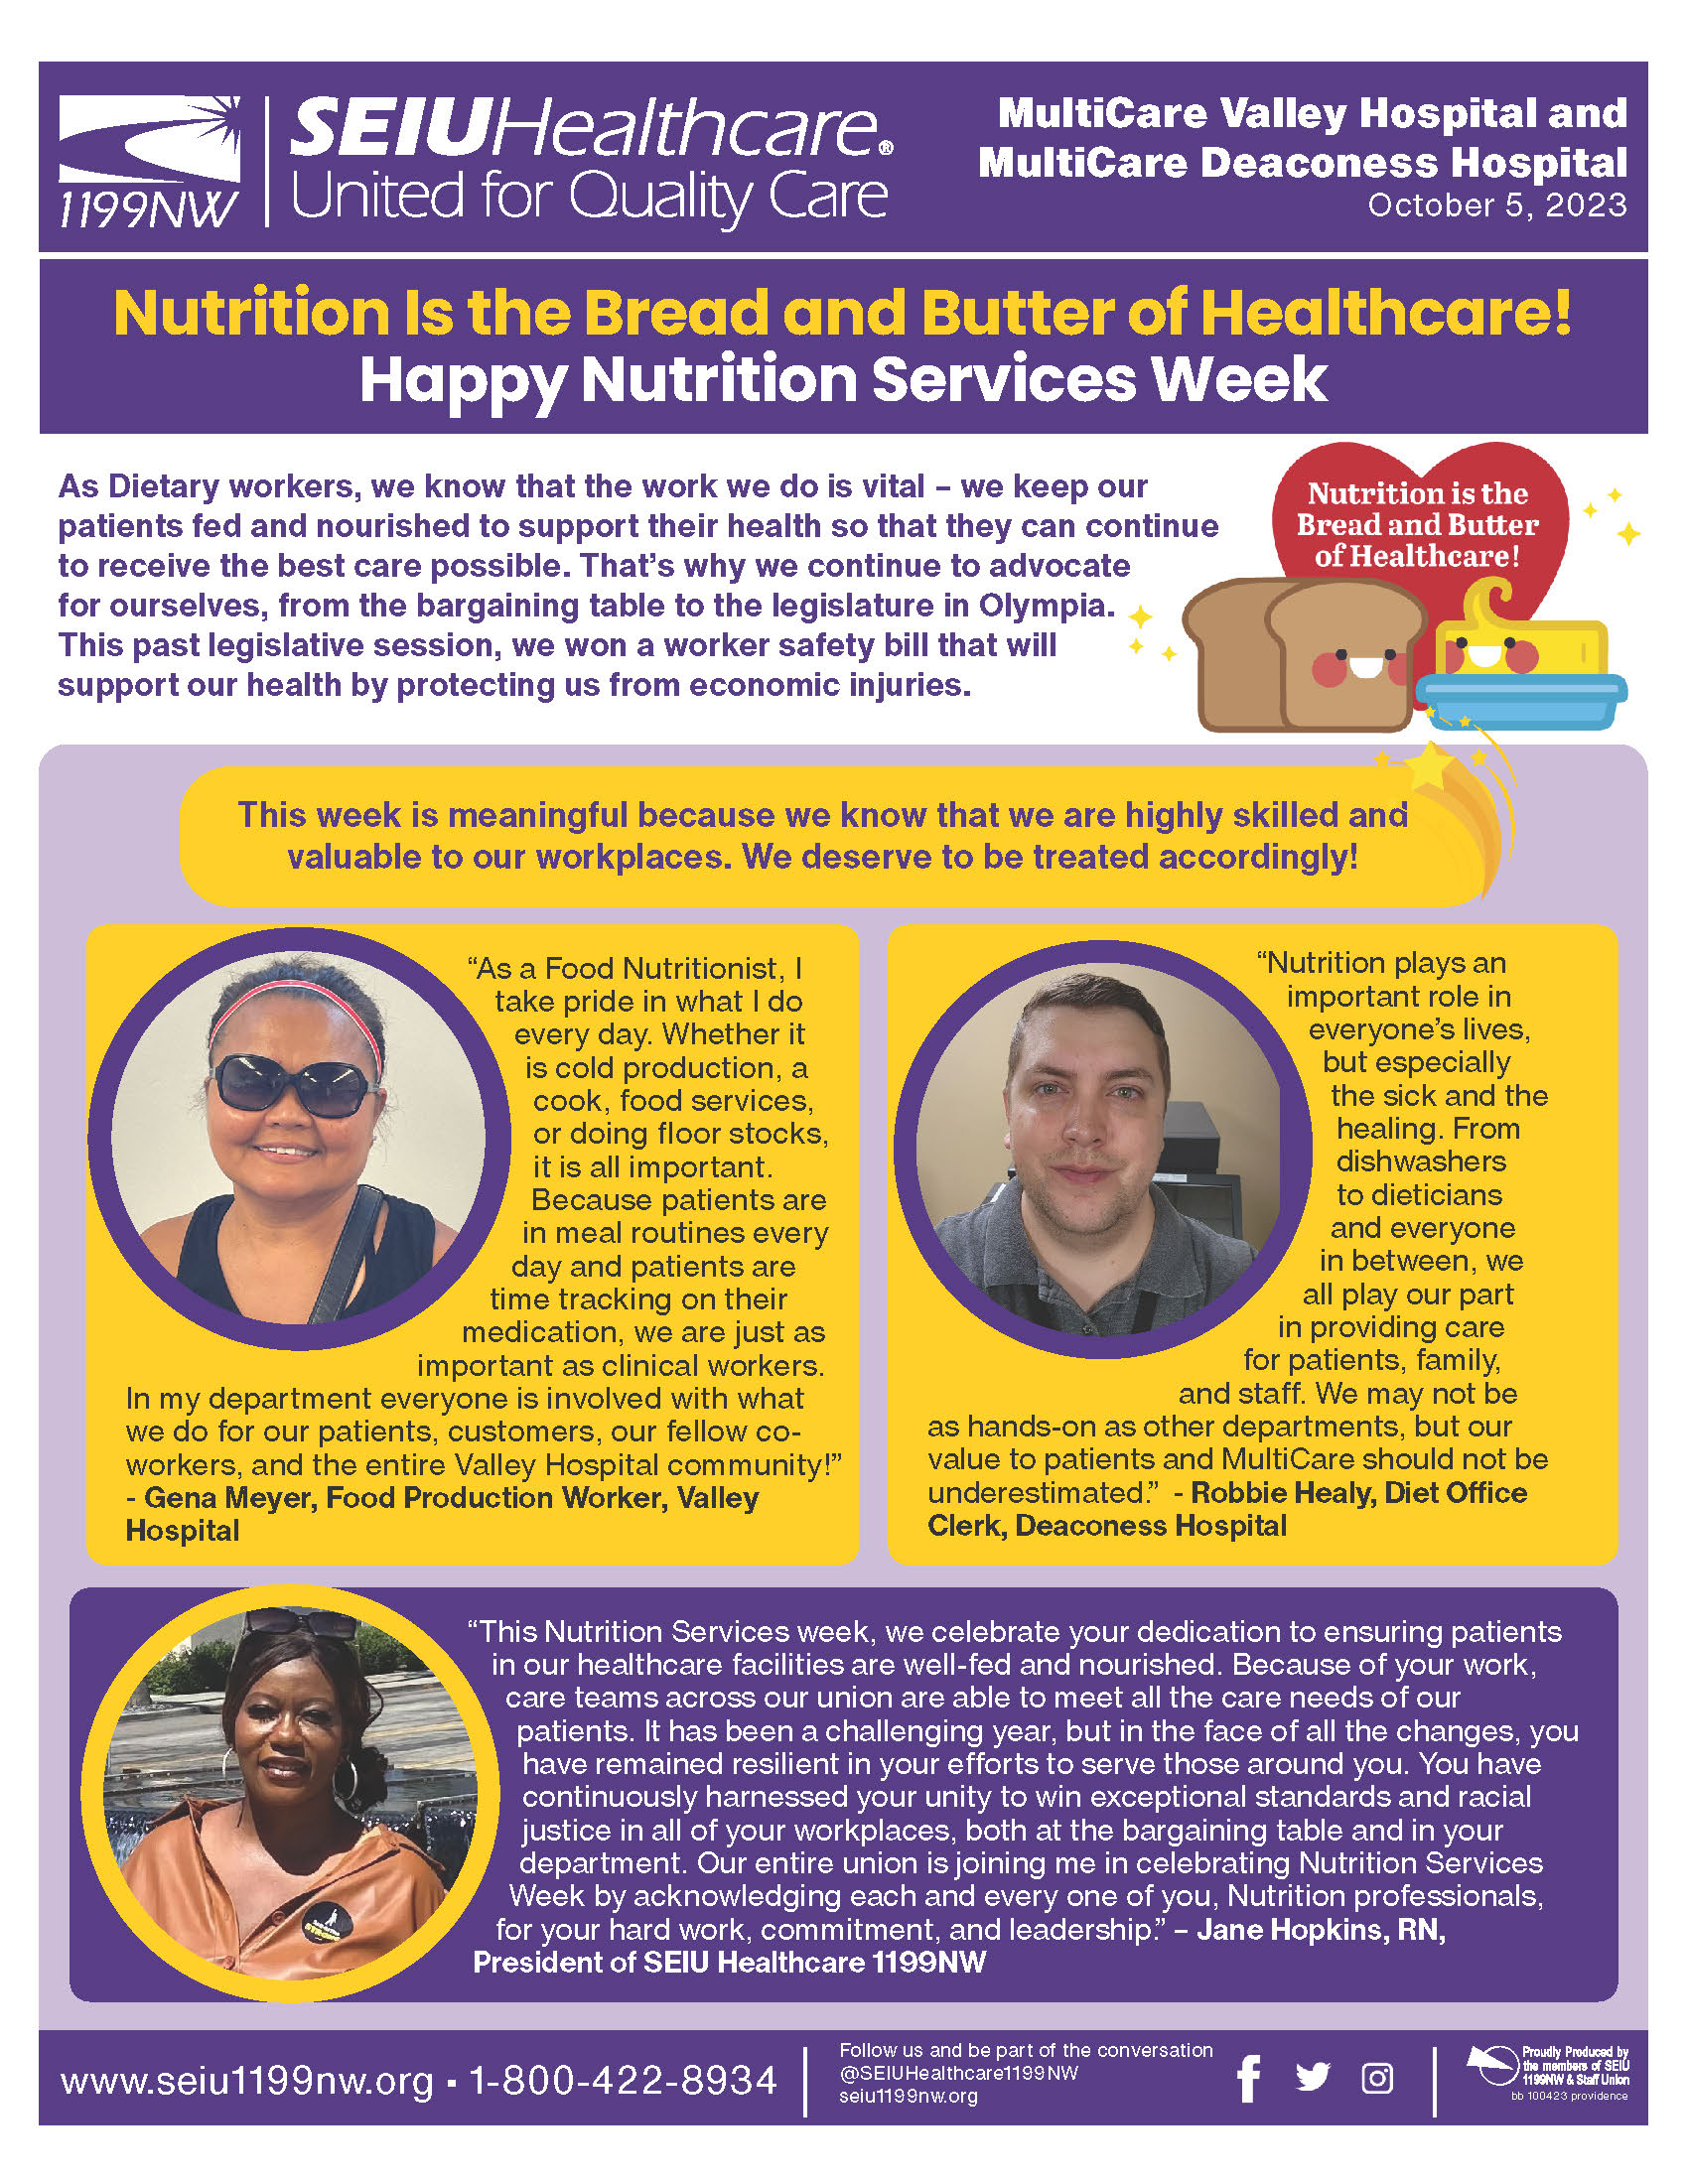 Nutrition Is the Bread and Butter of Healthcare! Happy Nutrition Services Week